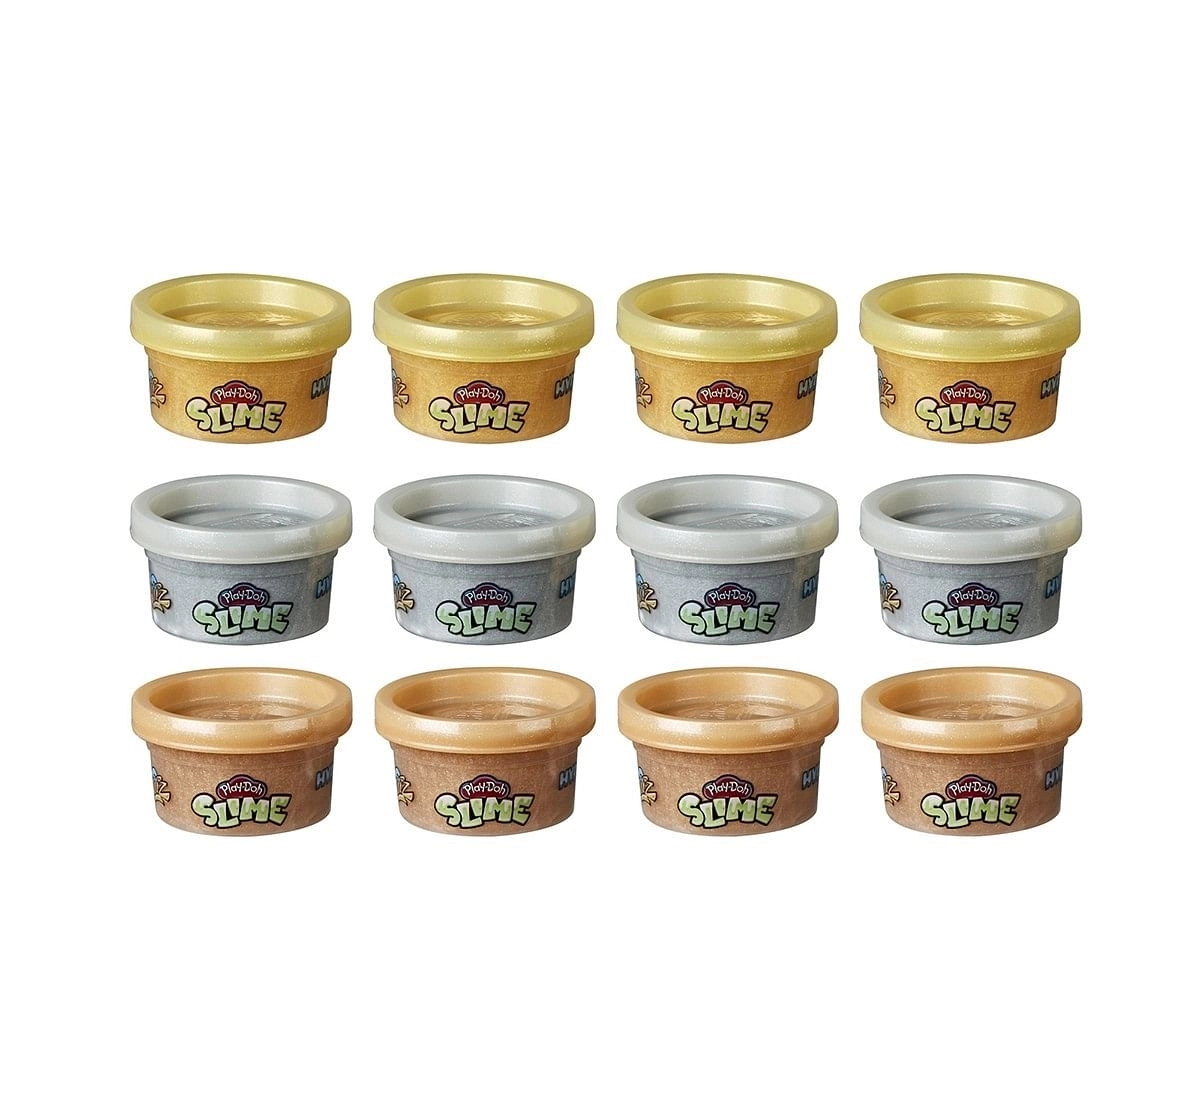 Play-Doh Slime Gold Collection HydroGlitz Molten Treasure 12-Pack of Liquid Metal-Looking Gold, Silver, and Rose Gold Colors, Non-Toxic 1-Ounce Cans Sand, Slime & Others for Kids age 3Y+ 